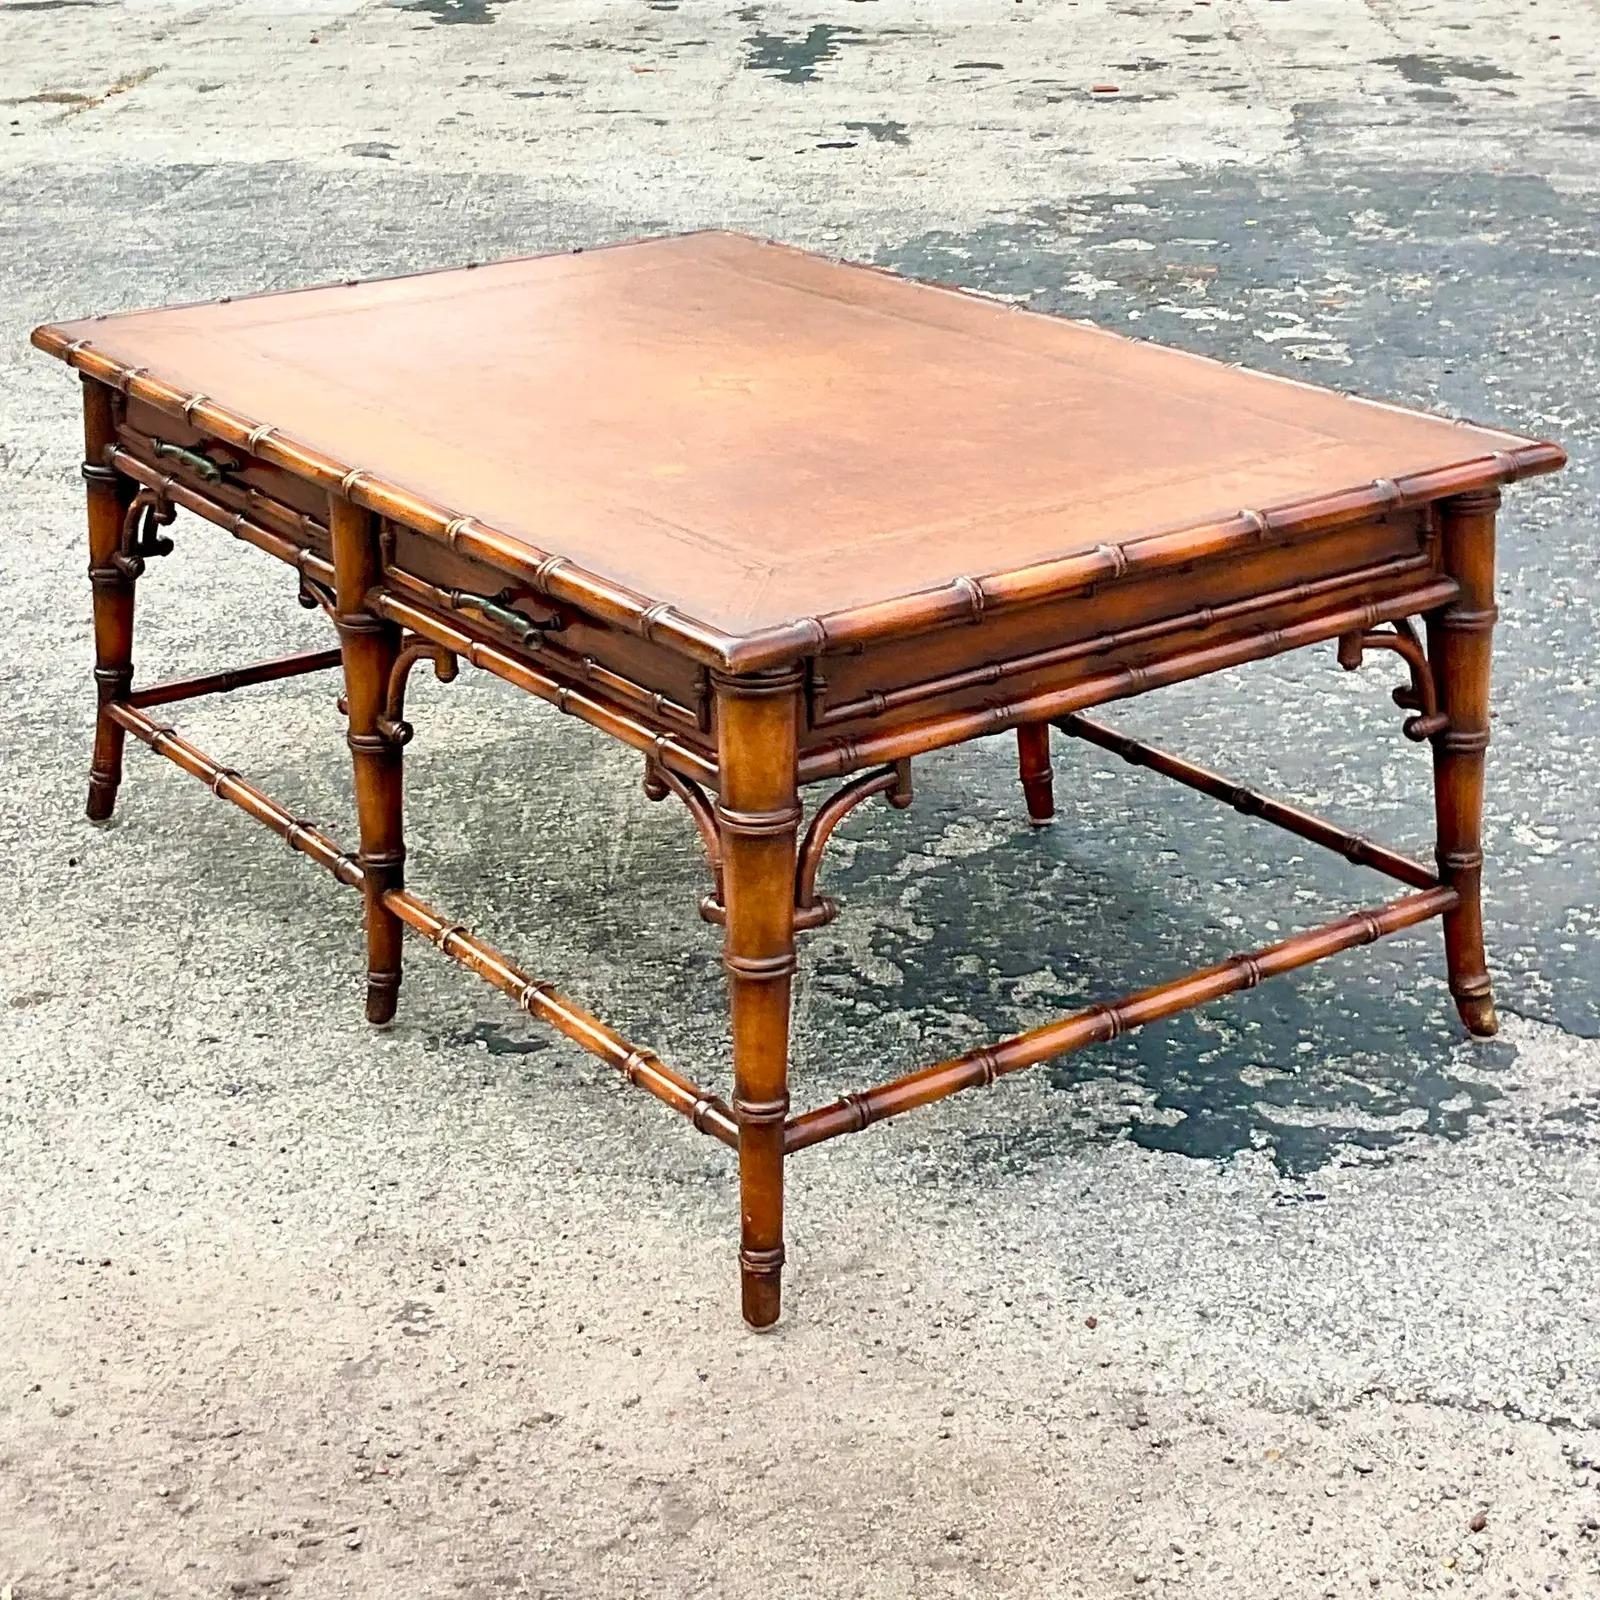 Vintage Regency Burnt Bamboo Coffee Table In Good Condition For Sale In west palm beach, FL